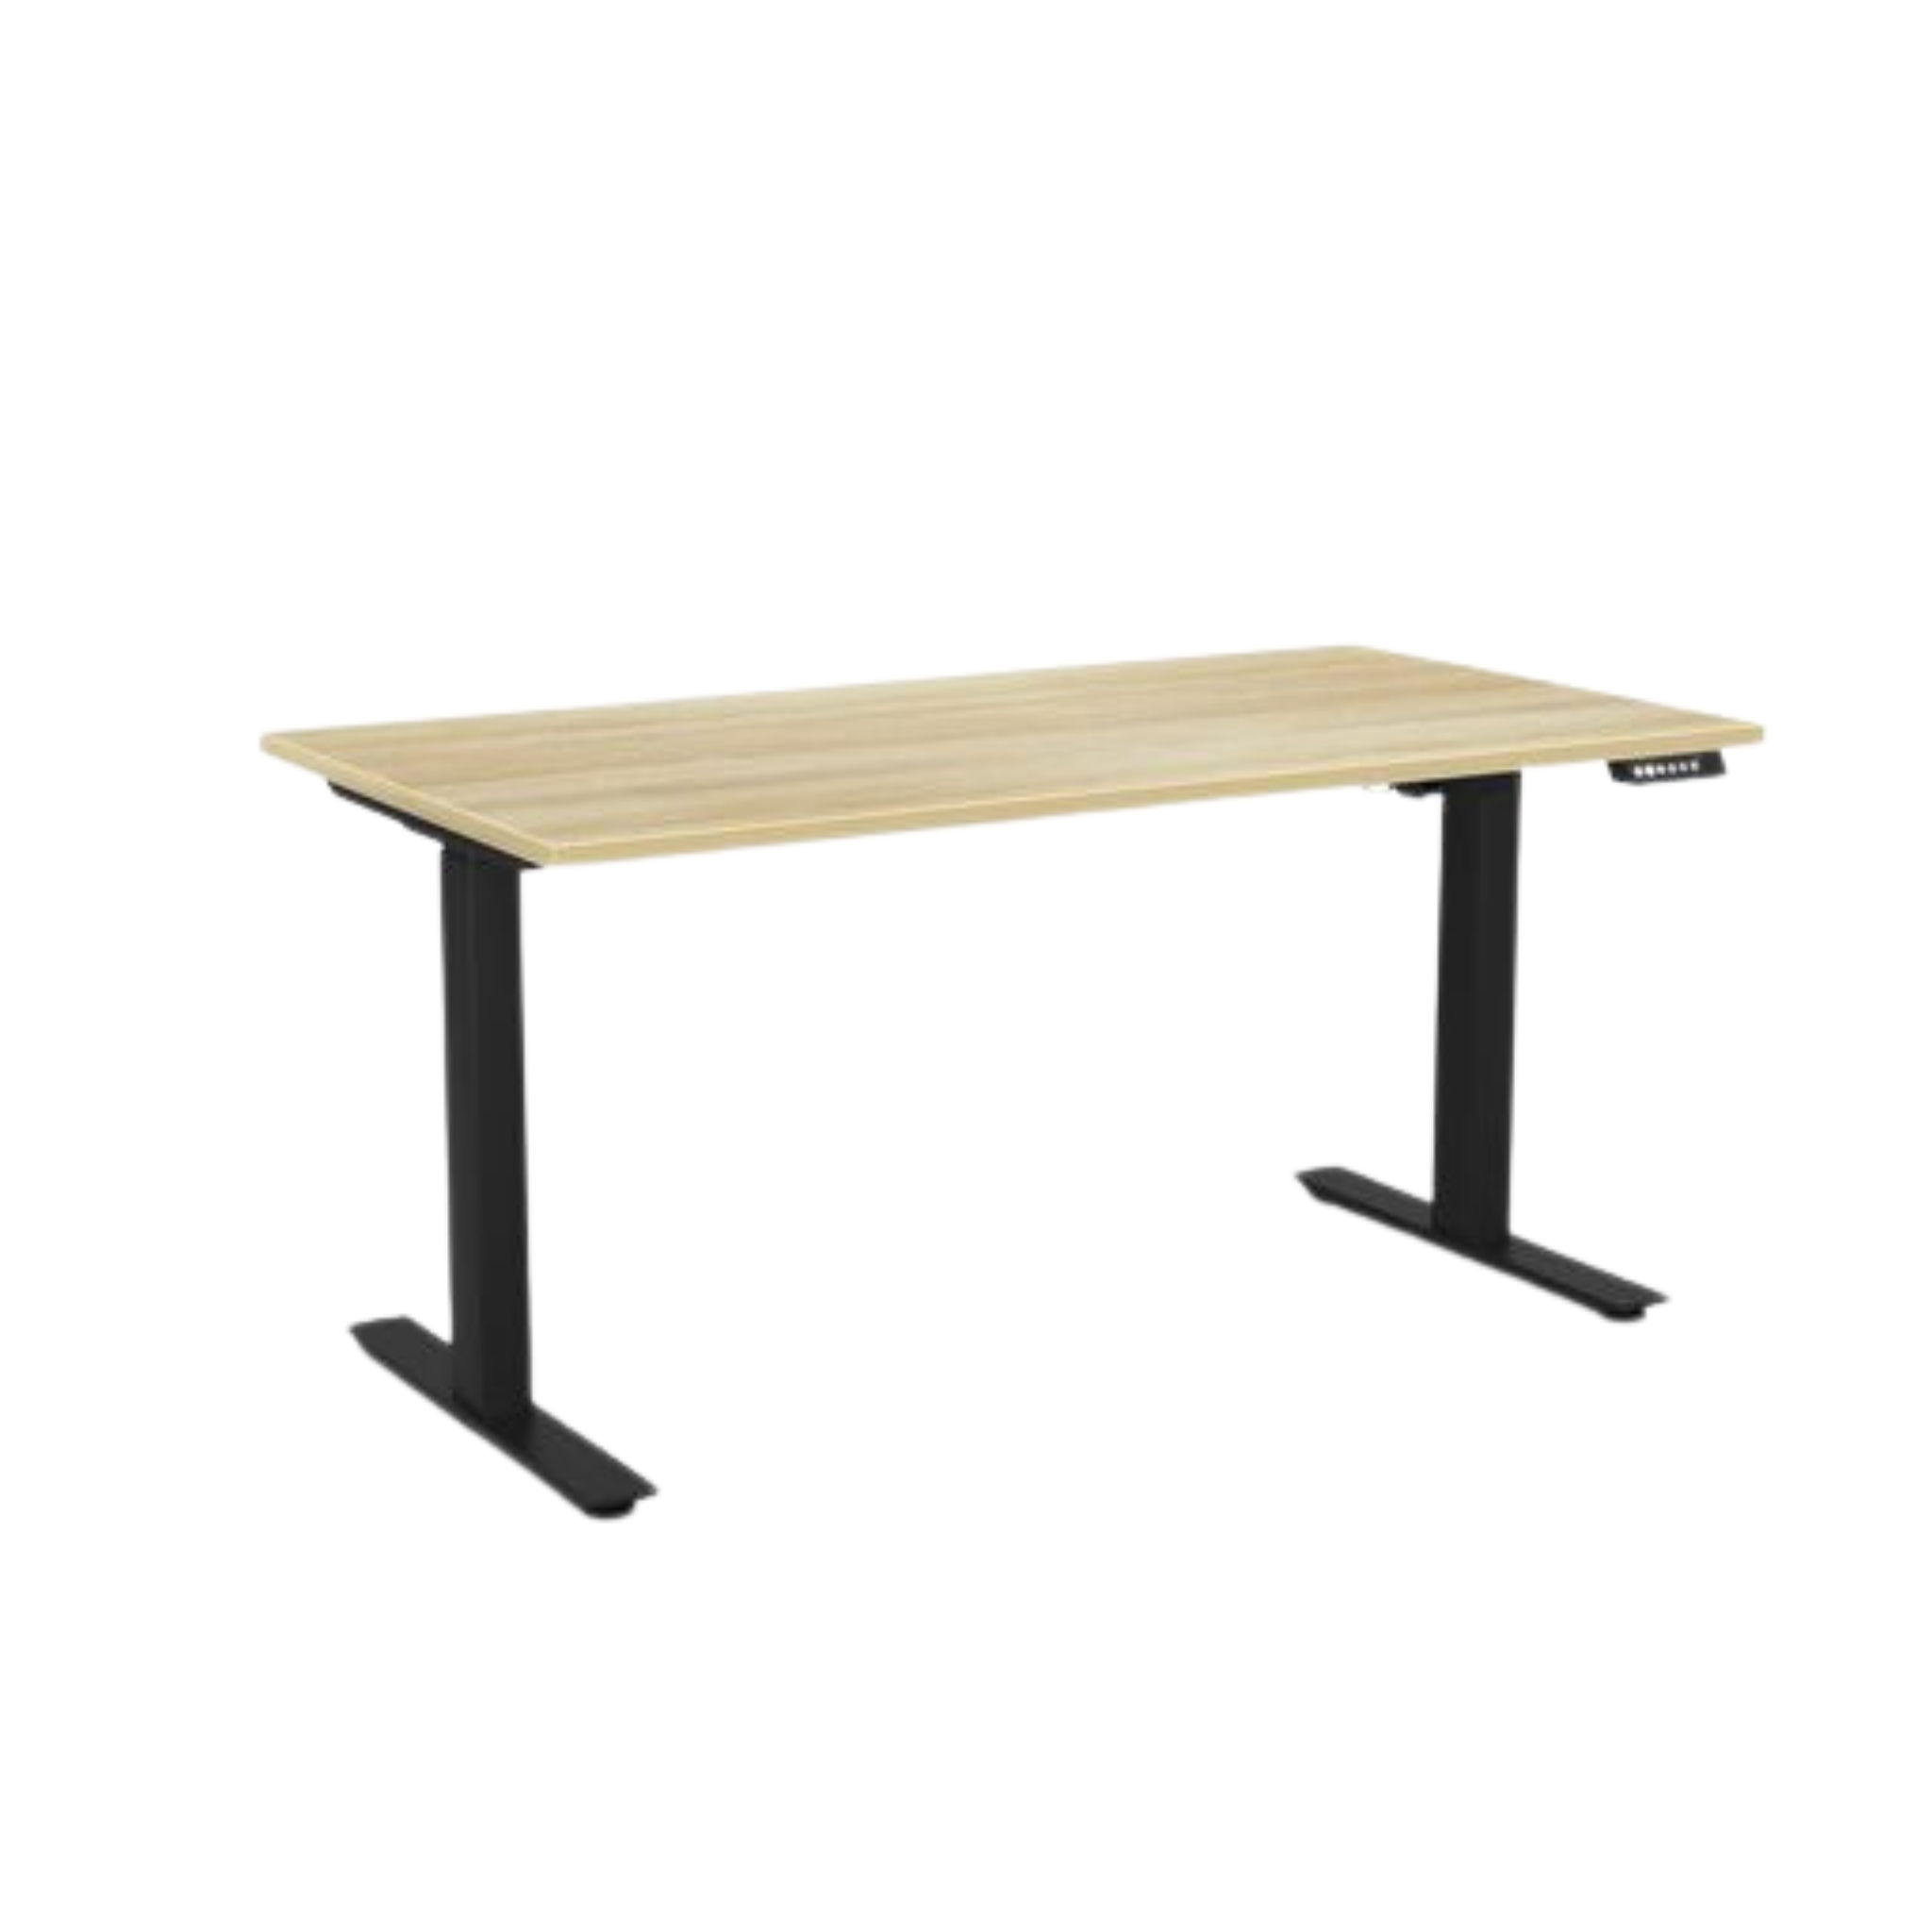 Agile 2 electric sit to stand desk with black frame and atlantic oak top